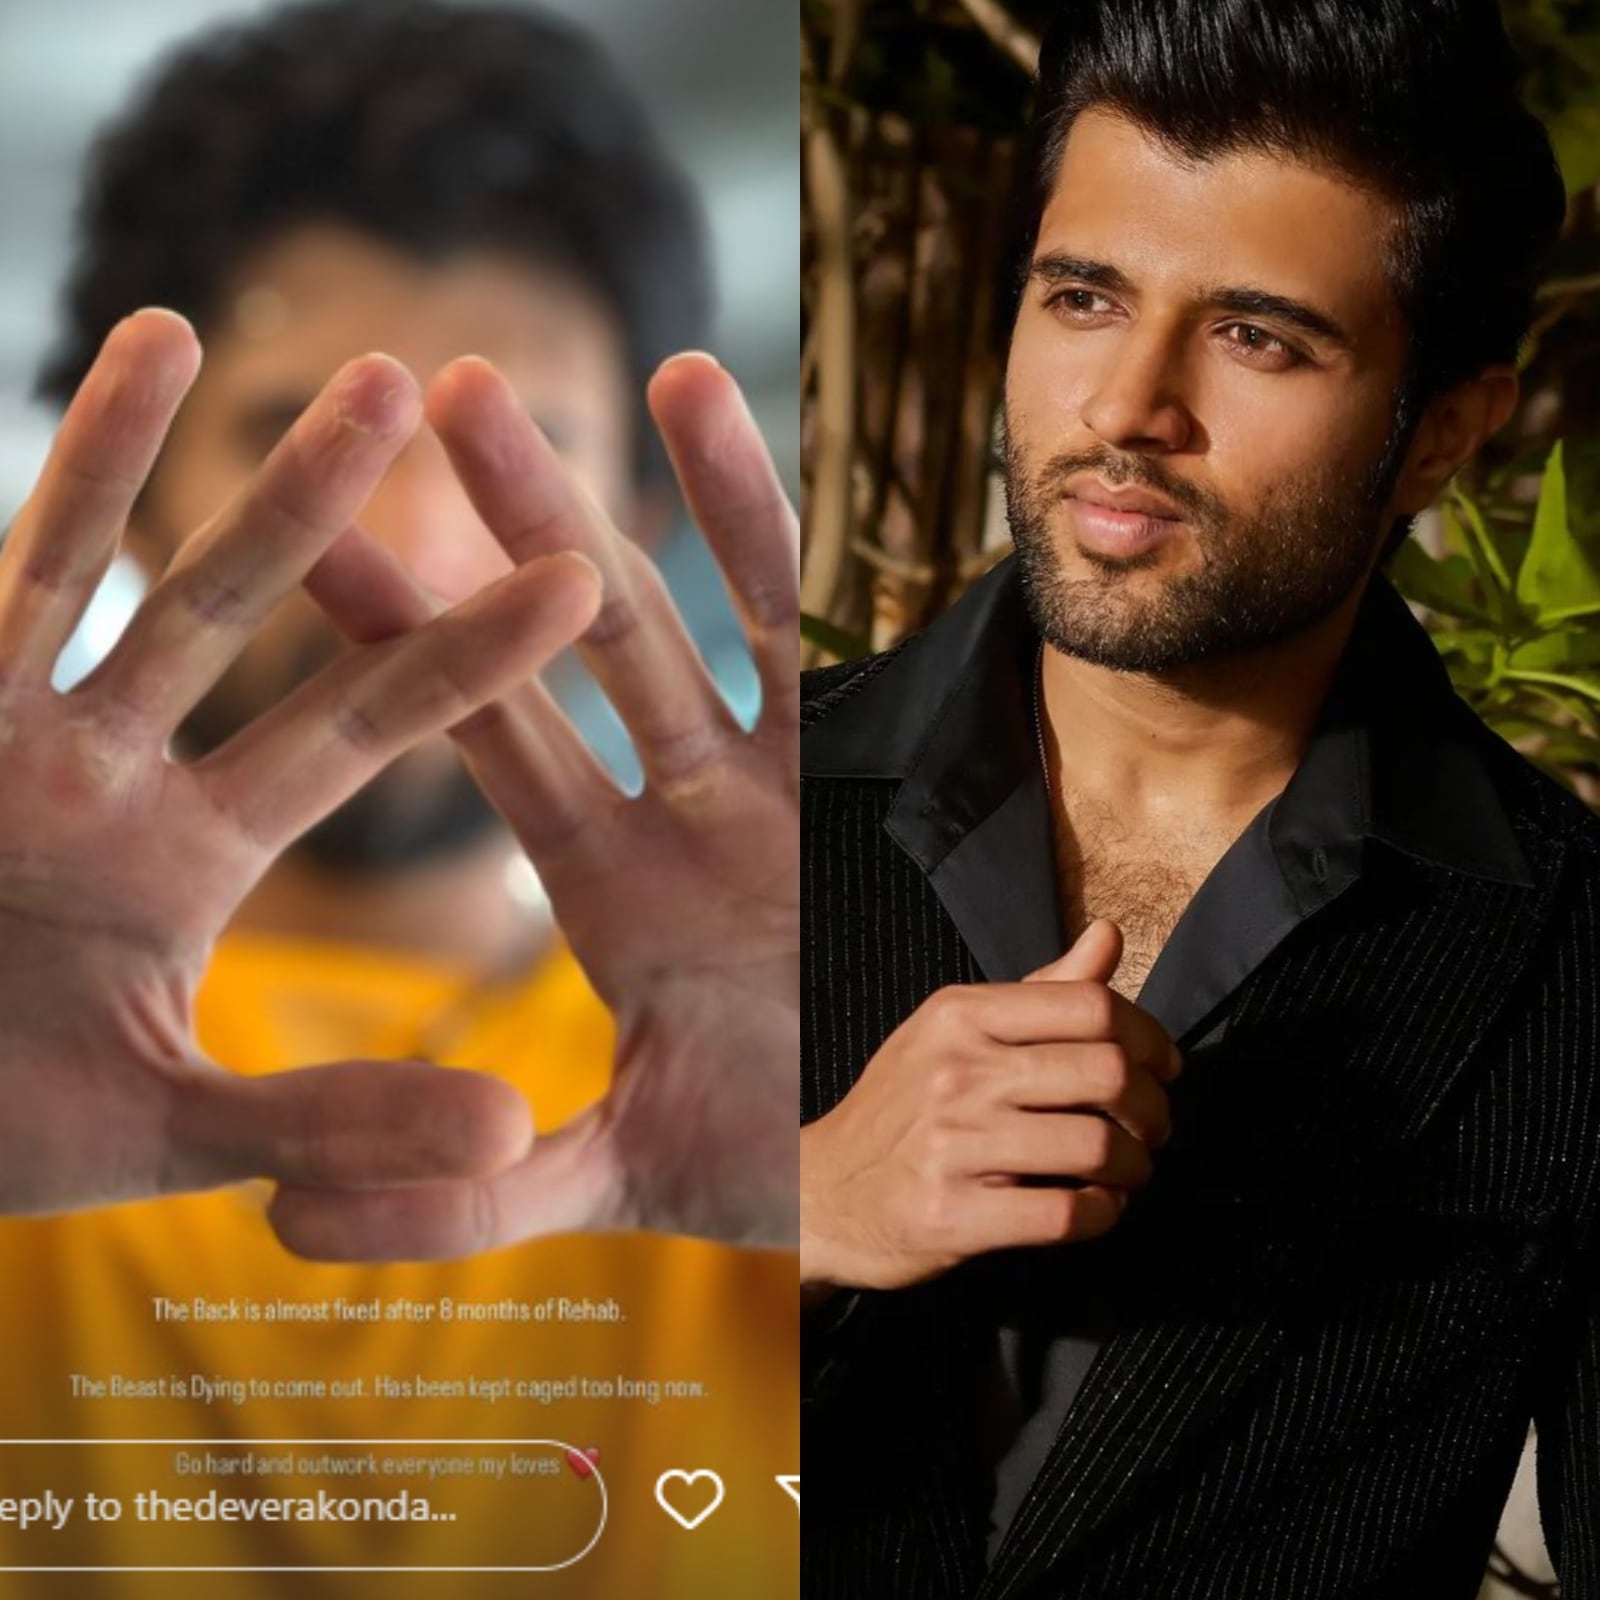 Vijay Deverakonda Recovers from Serious Injury After 8 Months, Says ‘The Beast Is Dying…’